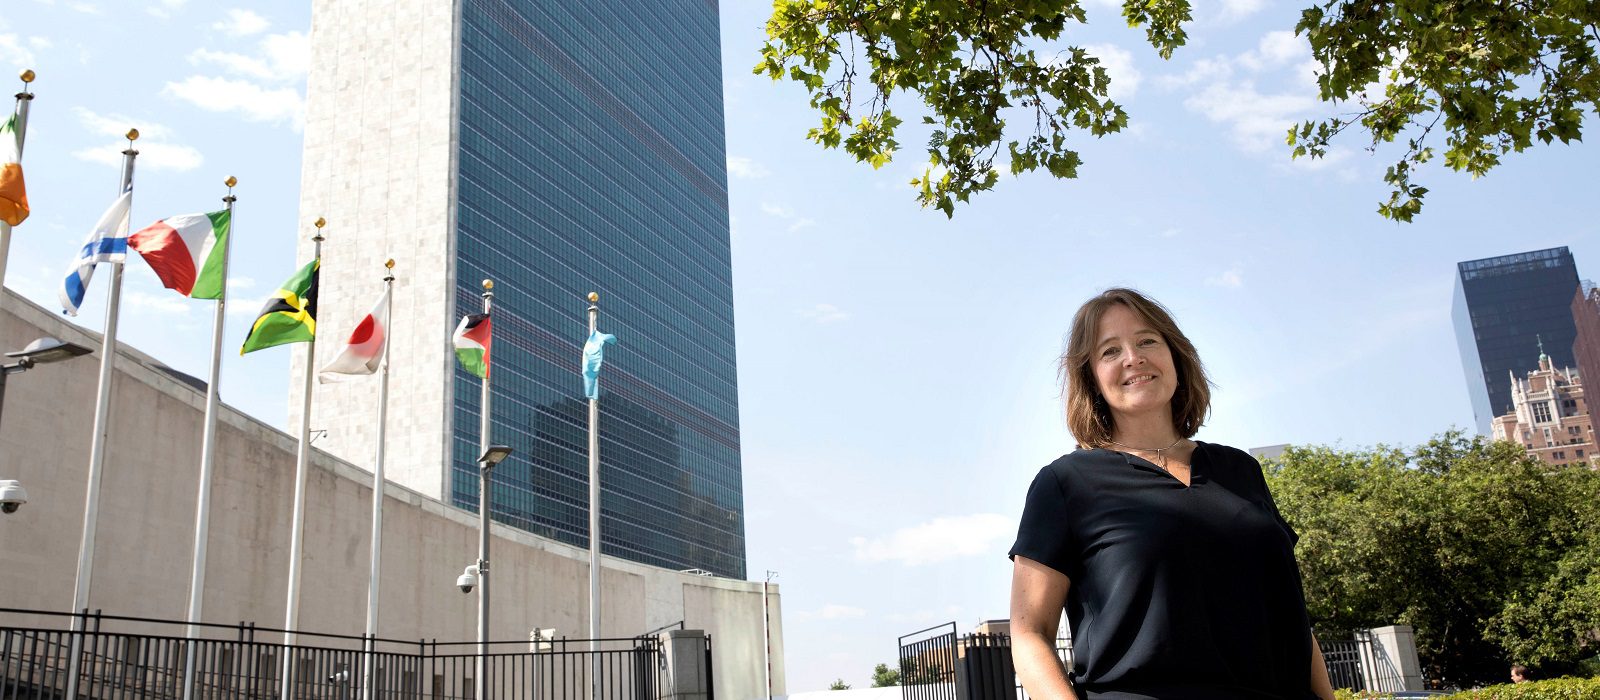 Ylva Folksam at UN for traffic safety event - July 2022